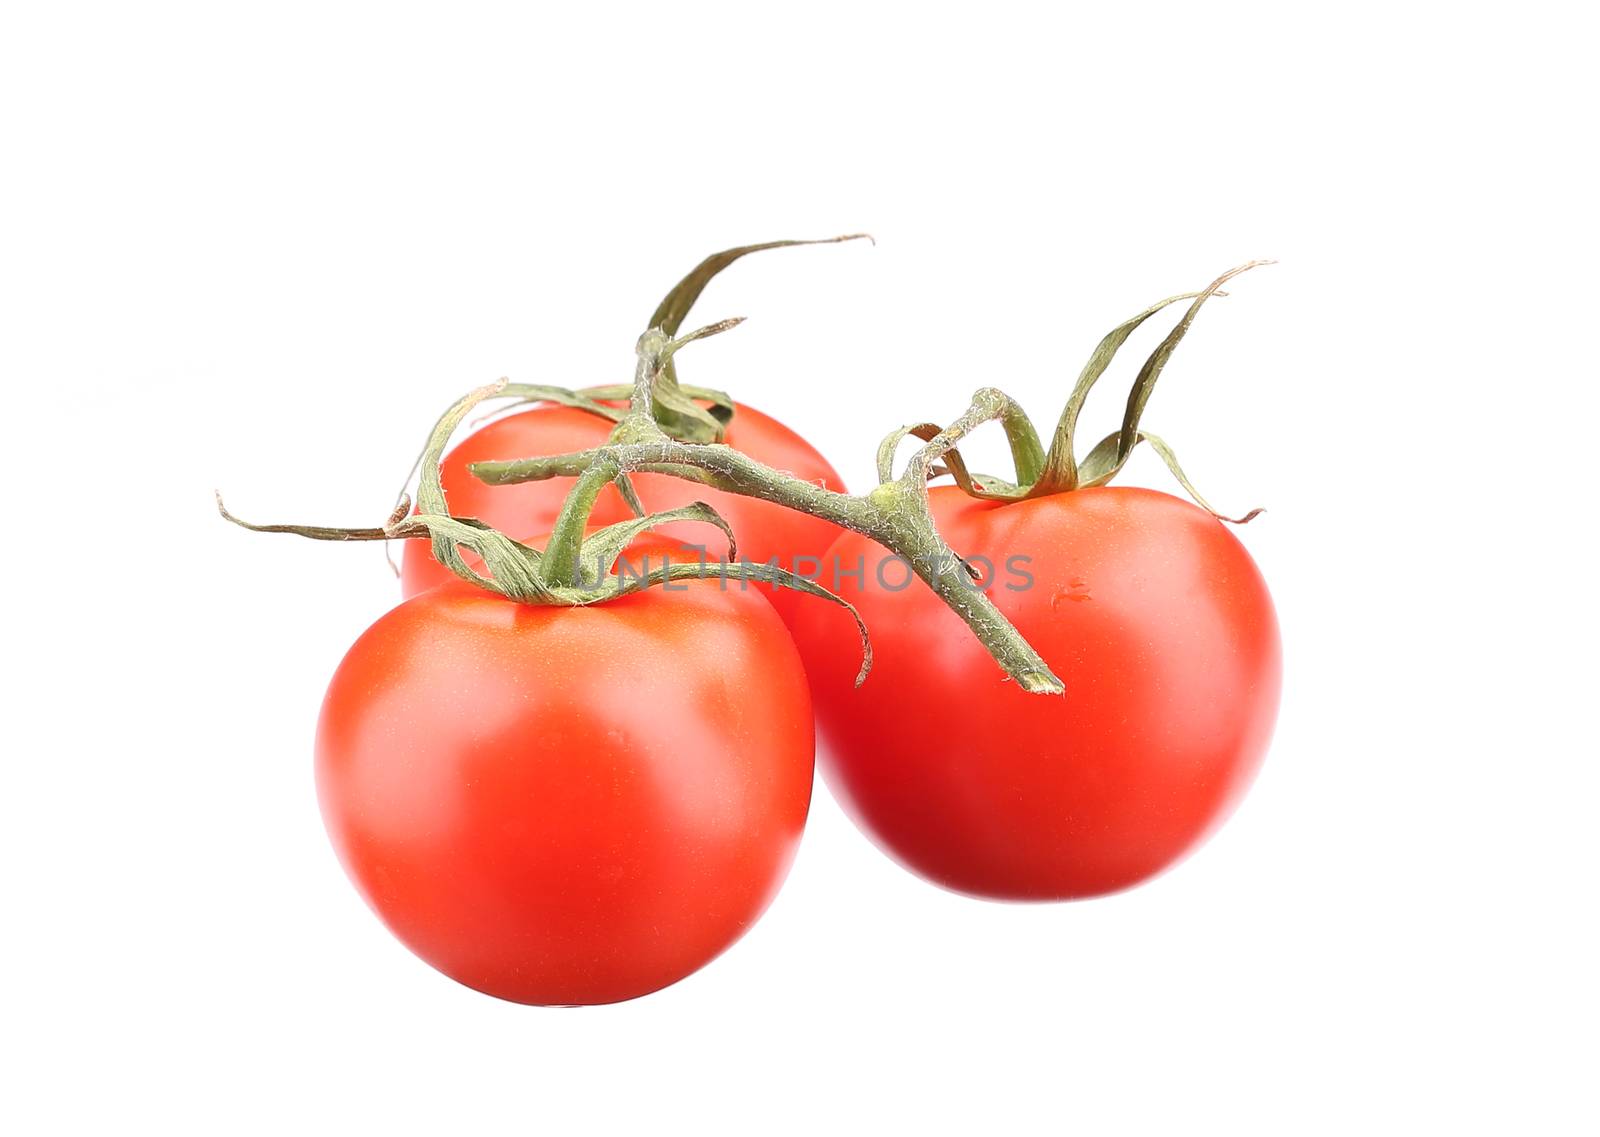 Ripe tomatoes. Isolated on a white background.